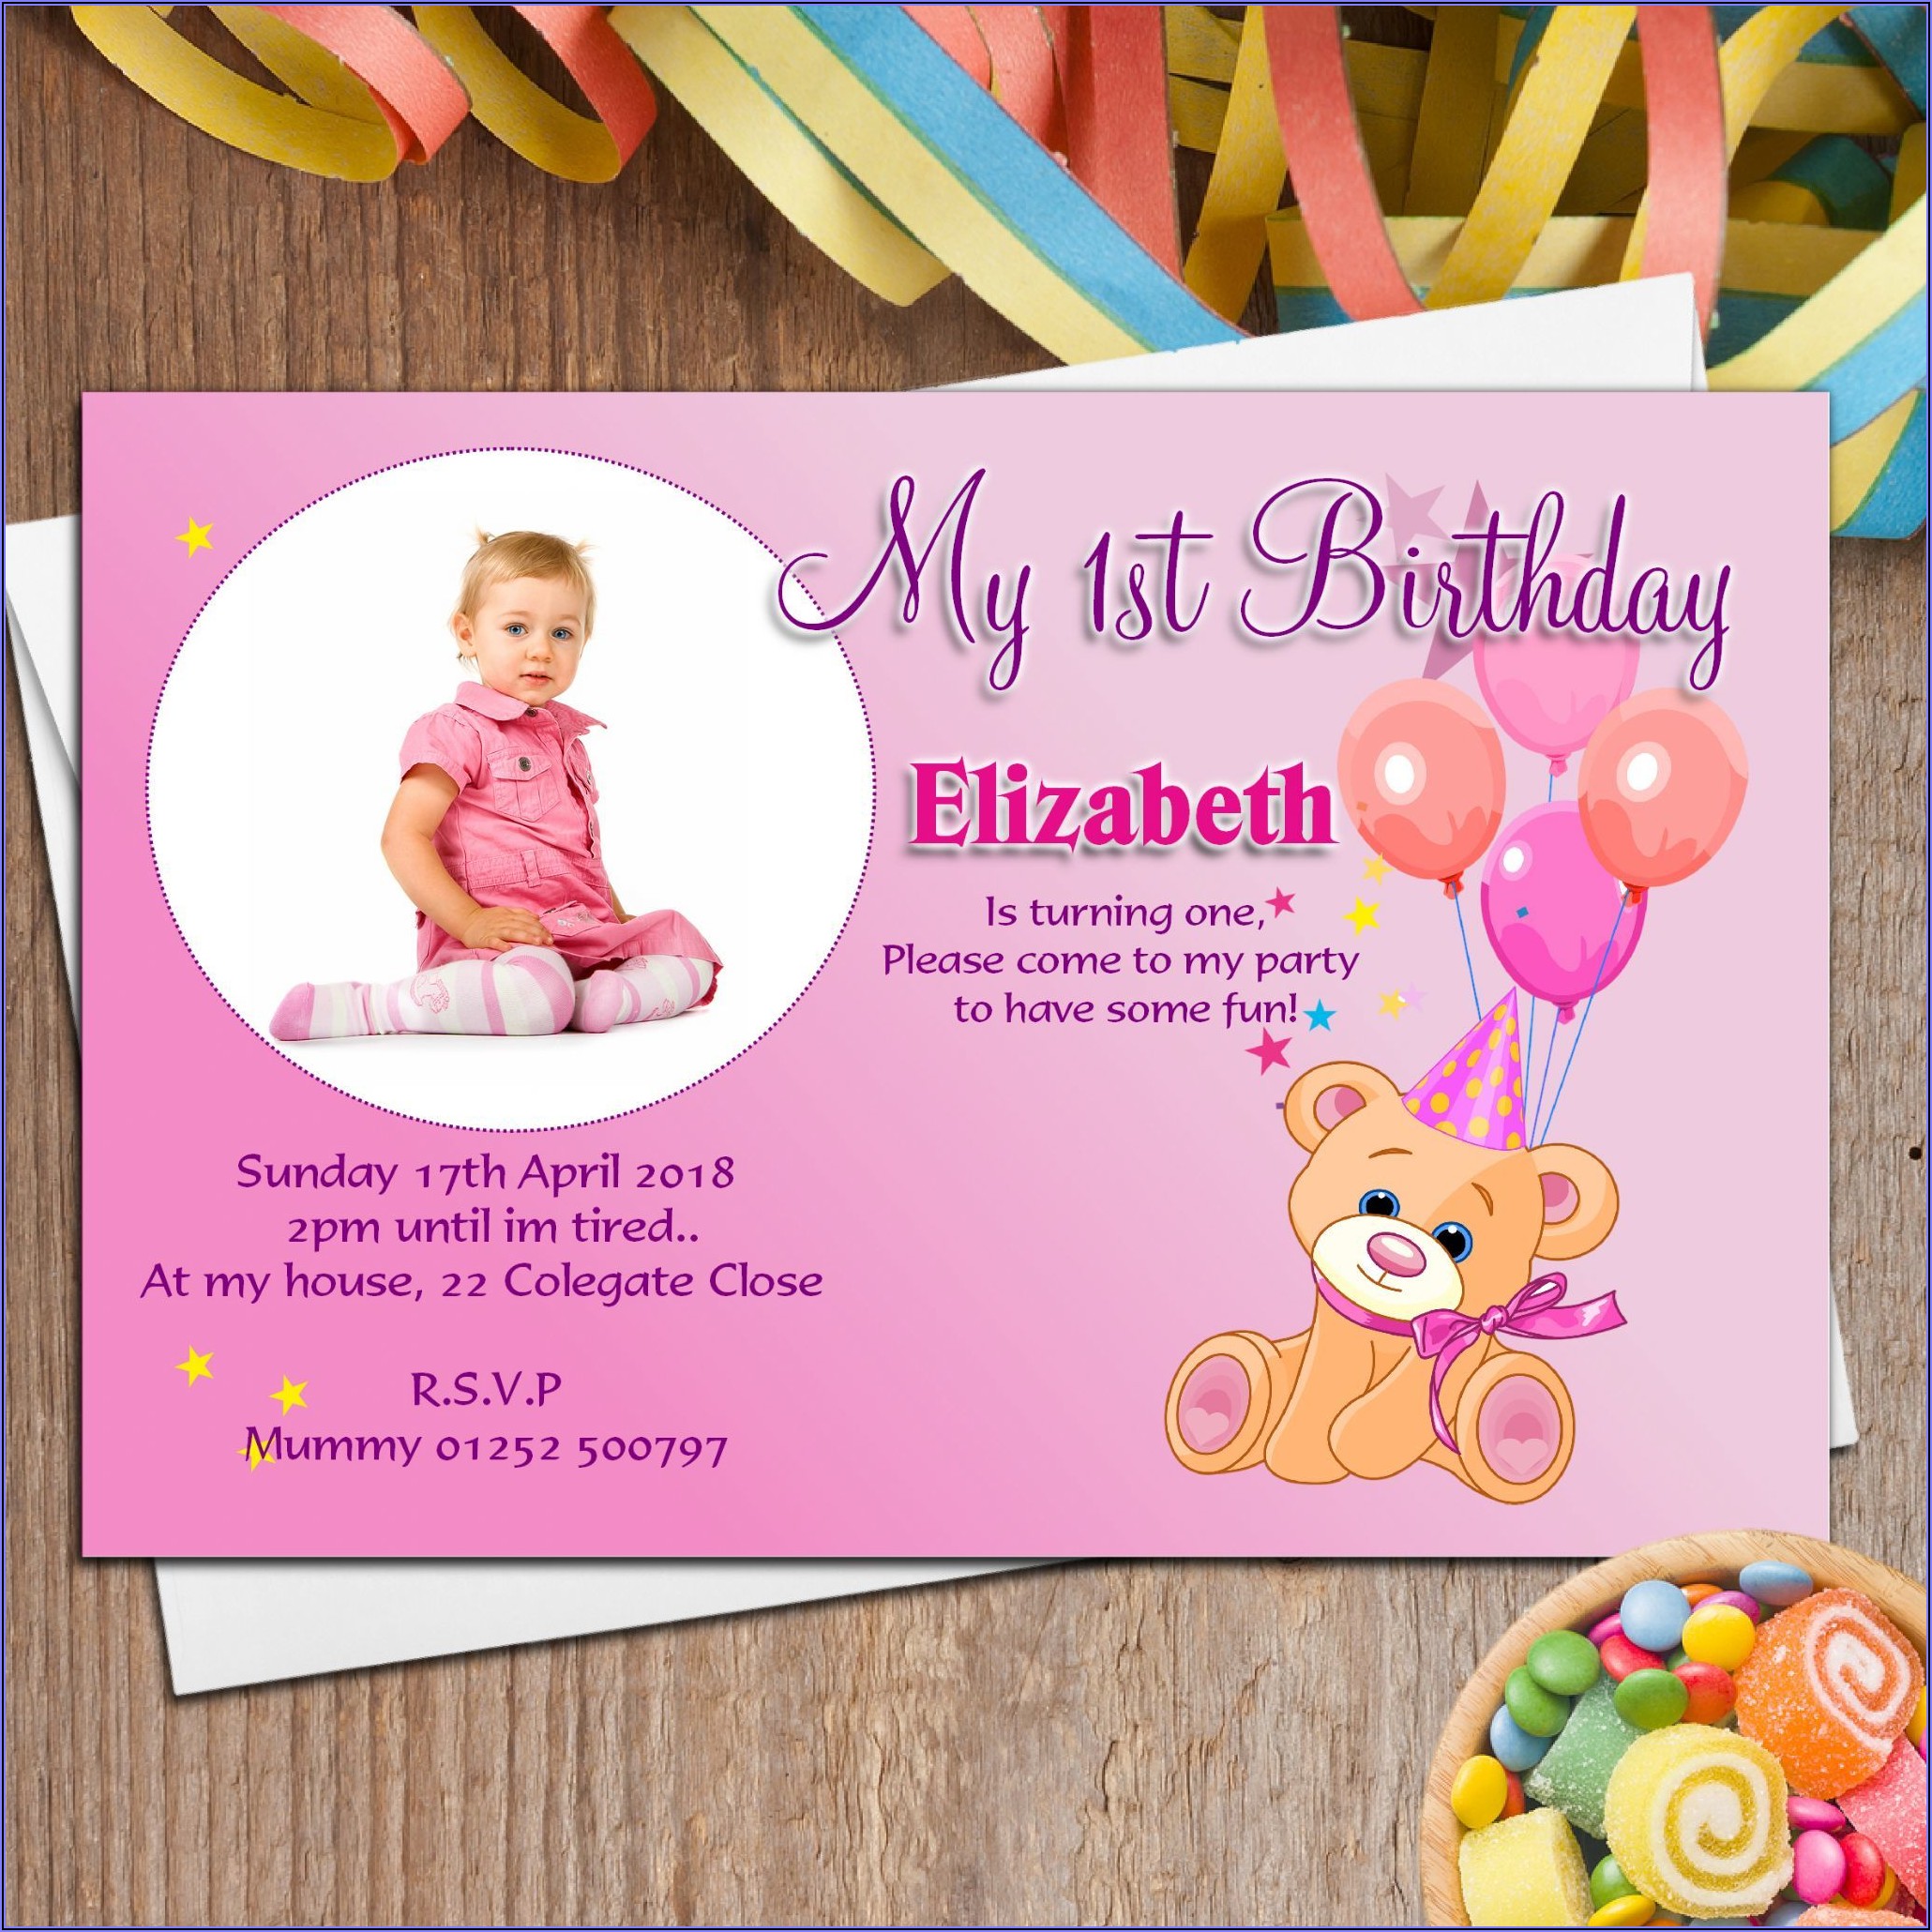 Customize Your Own Birthday Invitations Online Free